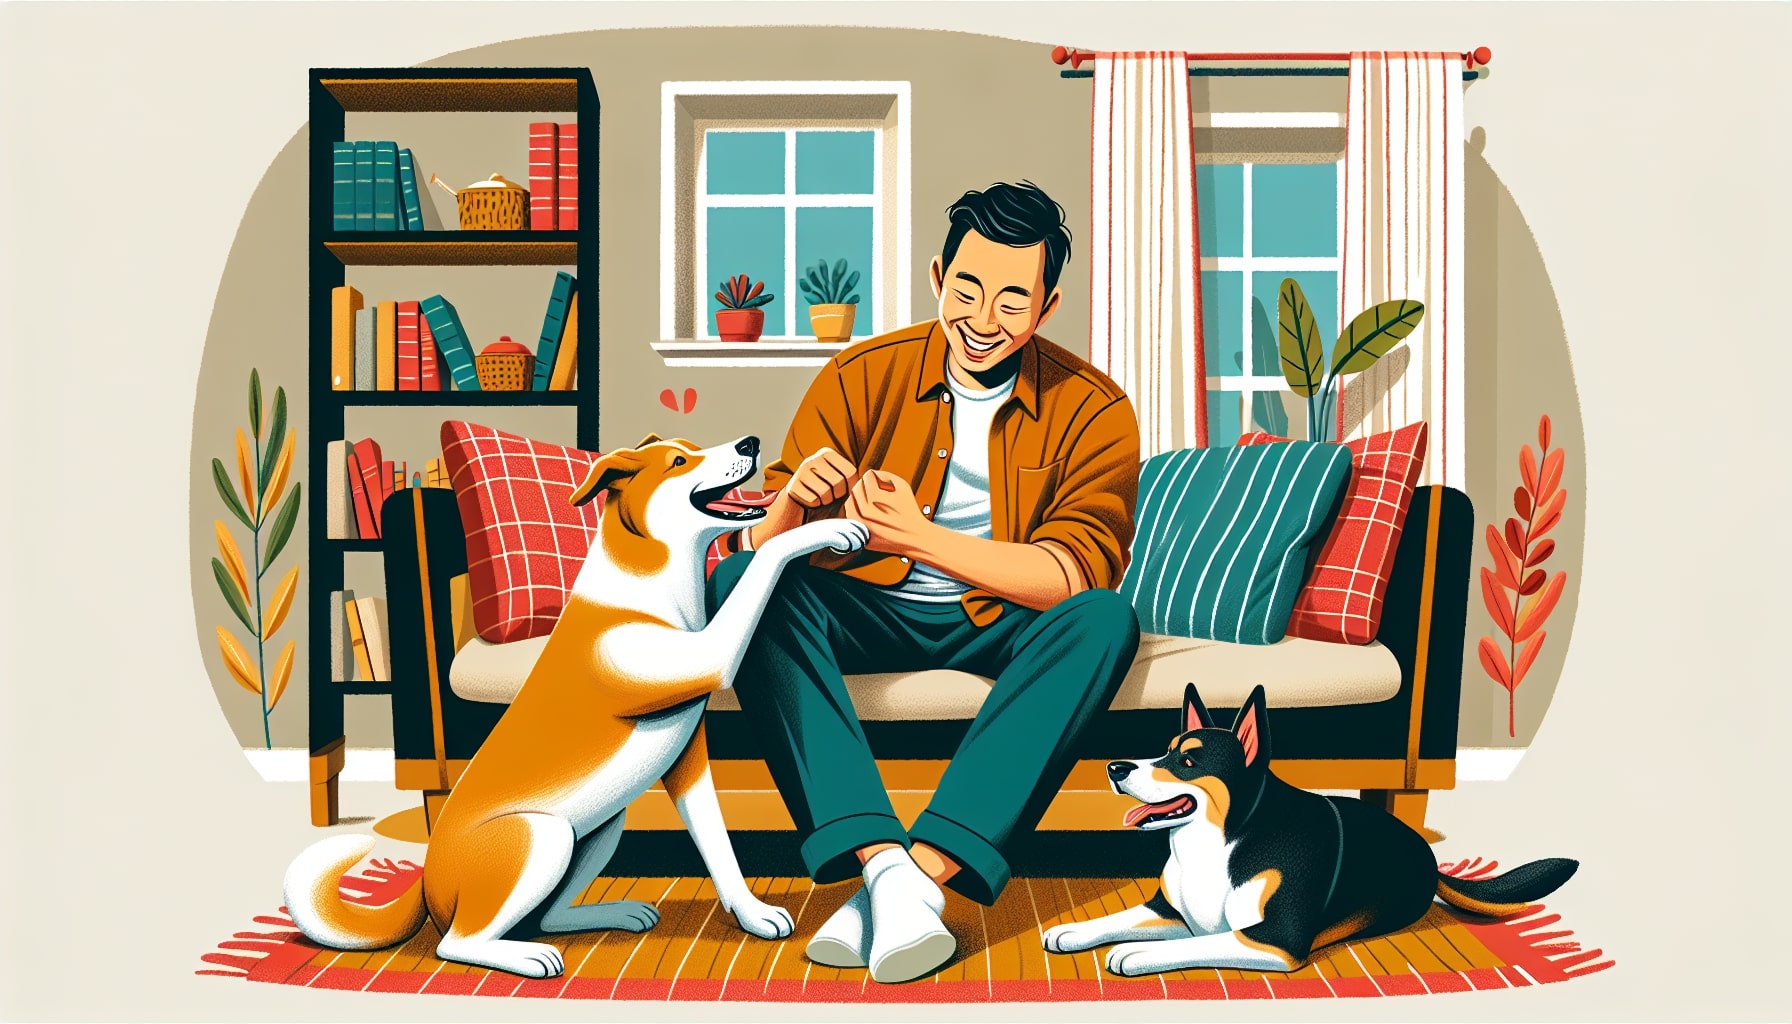 Man with dogs enjoying cozy home interior.